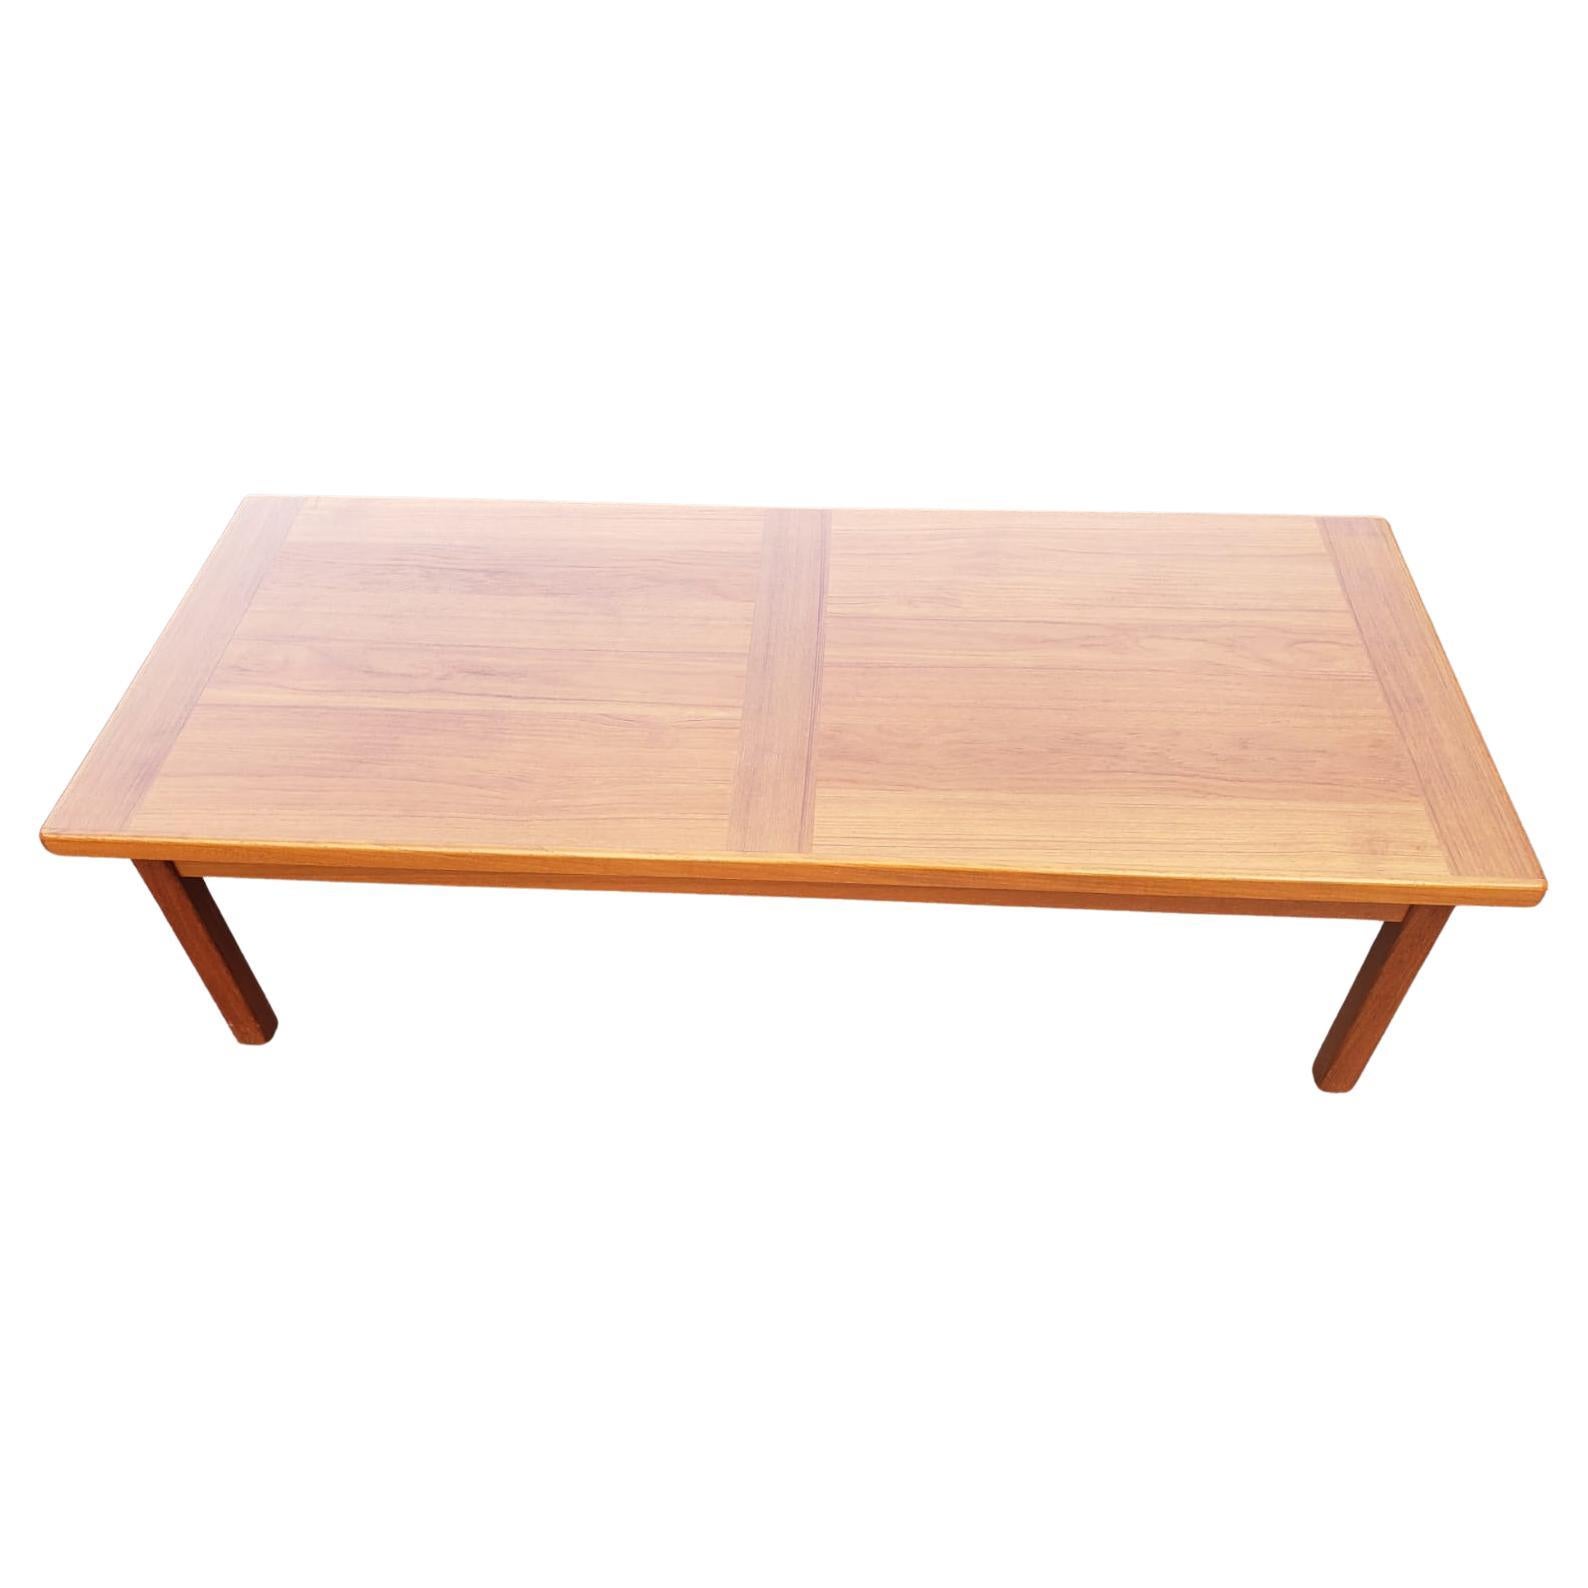 Vejle Stole & Møbelfabrik solid teak cocktail / coffee table in very good vintage condition. Measures 54